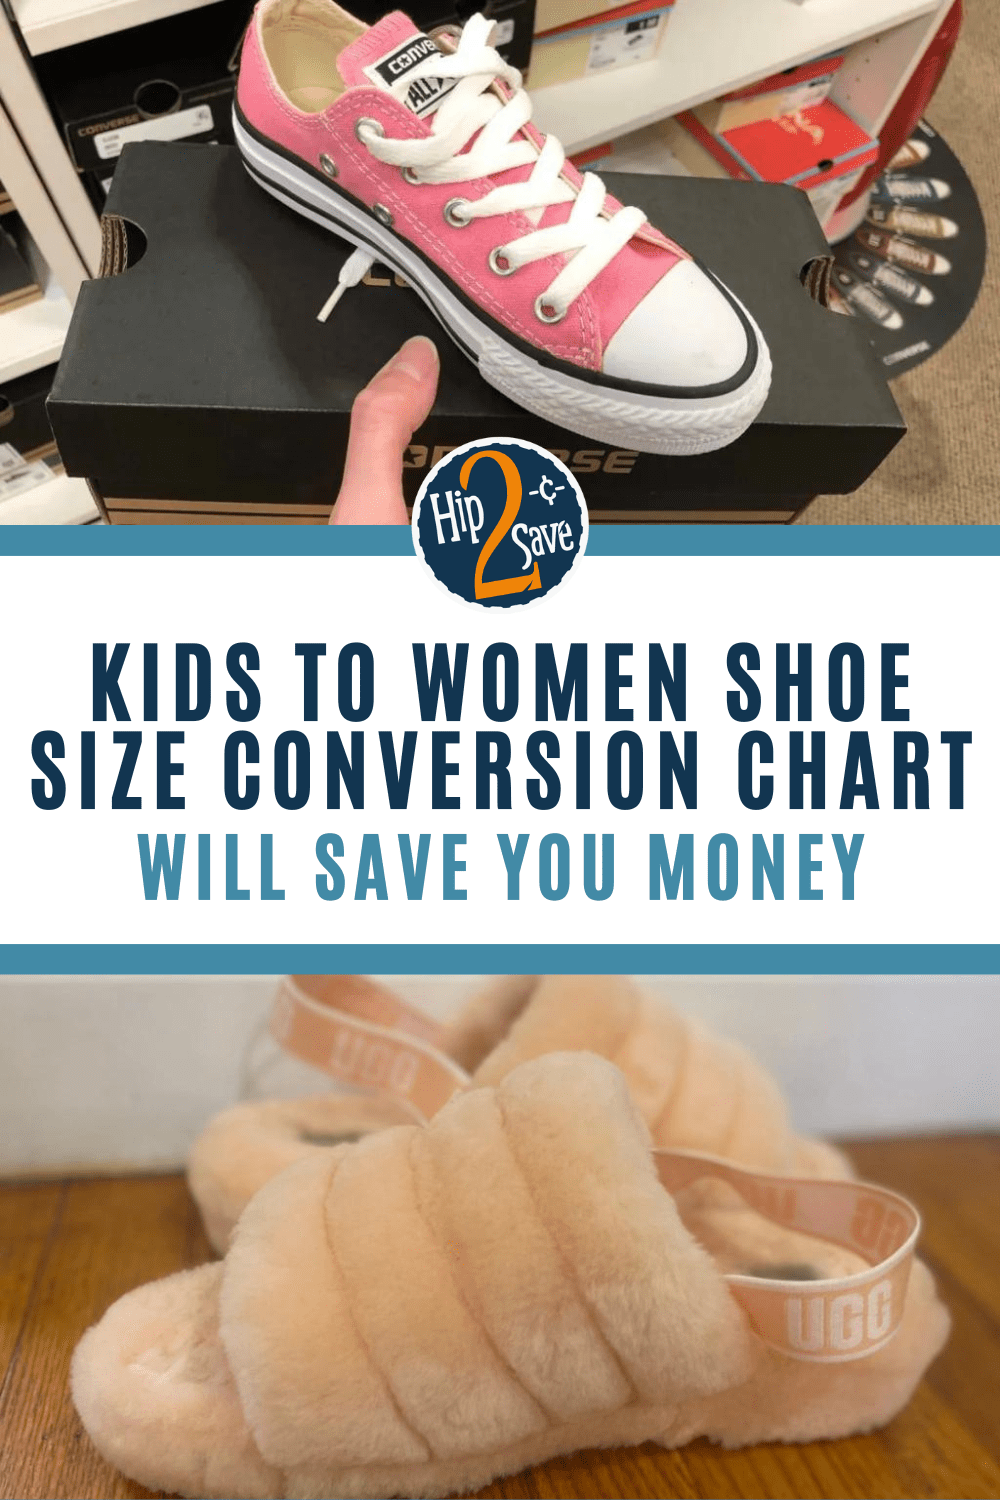 How to Convert Women's to Kids' Shoe Sizing